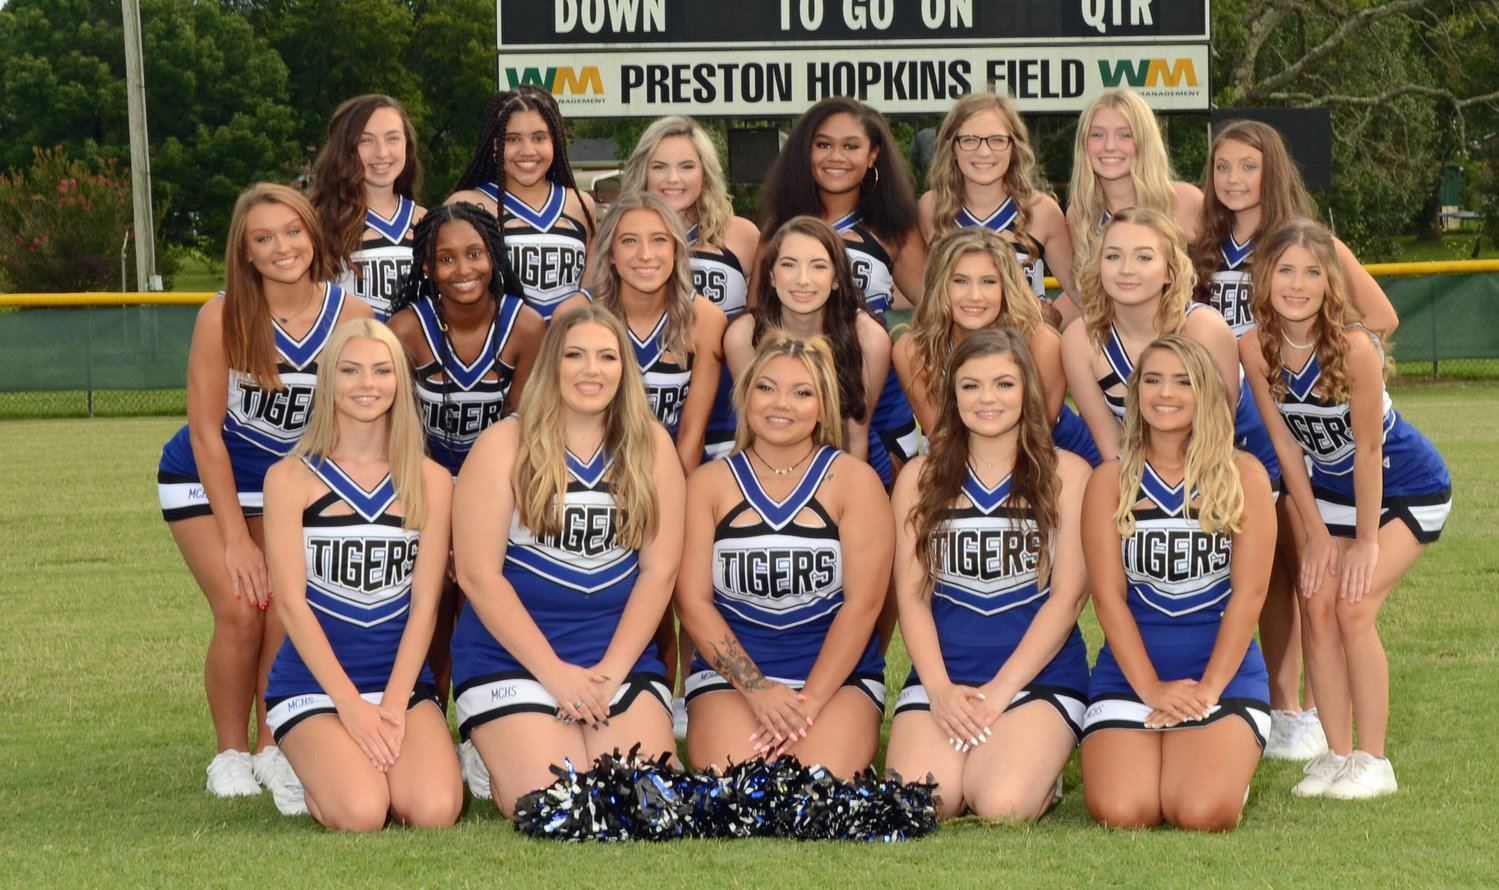 The 2020 MCHS cheerleaders. Front row from left are, Chelsea Hargrove, Skylyn Sharp, Masiya Urguhart, Hope Sweeney, and Hannah Inabnitt. Middle row from left are, Anna Grace Wunderlin, Heaven Wicks, Vallee Brewer, Taylor Leverette, Kaitlyn Joyce, Cassandra Richardson, and Sophia Pigg. Back row from left are, Leah Curtis, Lea Martin, Reese West, Araya Green, Mallory Hardison, Jaci Brady, and Georgia Scribner.